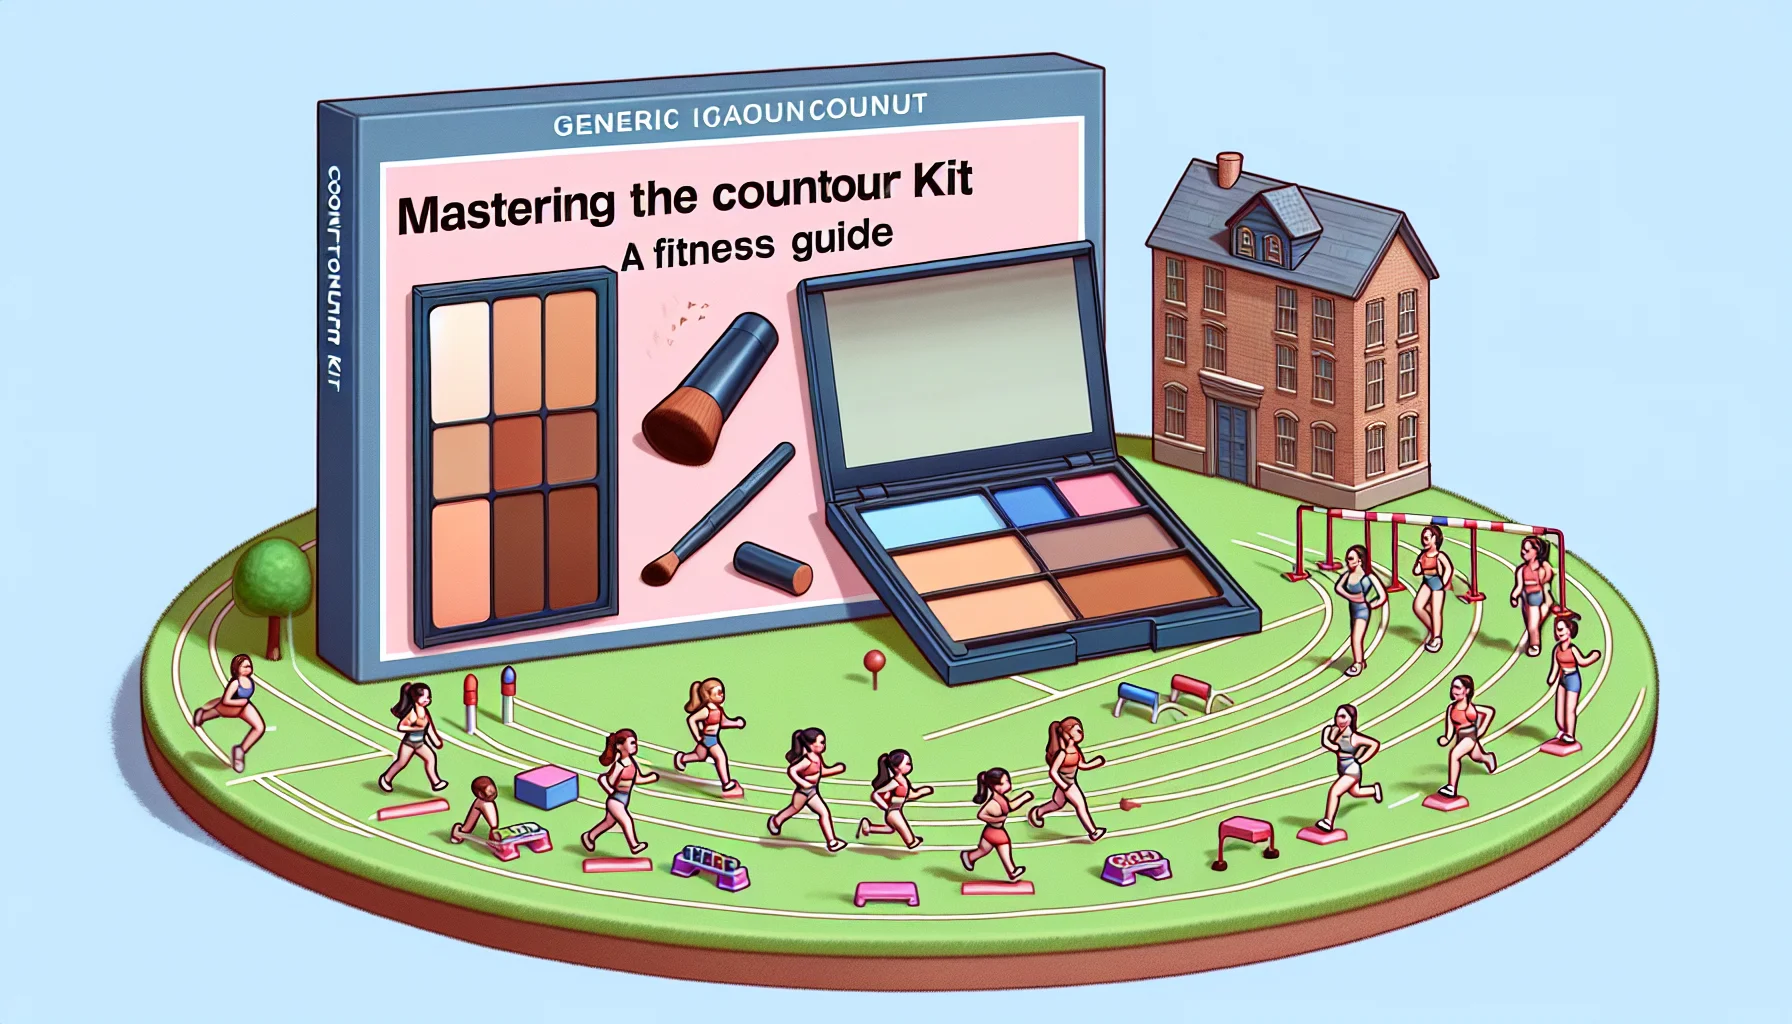 Construct a humorous scenario that encourages physical activity, using a generic makeup contour kit as the central element. Picture a scene where, rather than applying the kit to enhance facial features, people are playfully using it as lightweight exercise equipment. Create the contour kit realistically, demonstrating its palette with diverse shades, and present it in an amusing way, such as pathways for tiny toy runners or hurdles for miniature gymnasts. Finally, overlay the image with a guide titled: 'Mastering the Contour Kit: A Fitness Guide'.